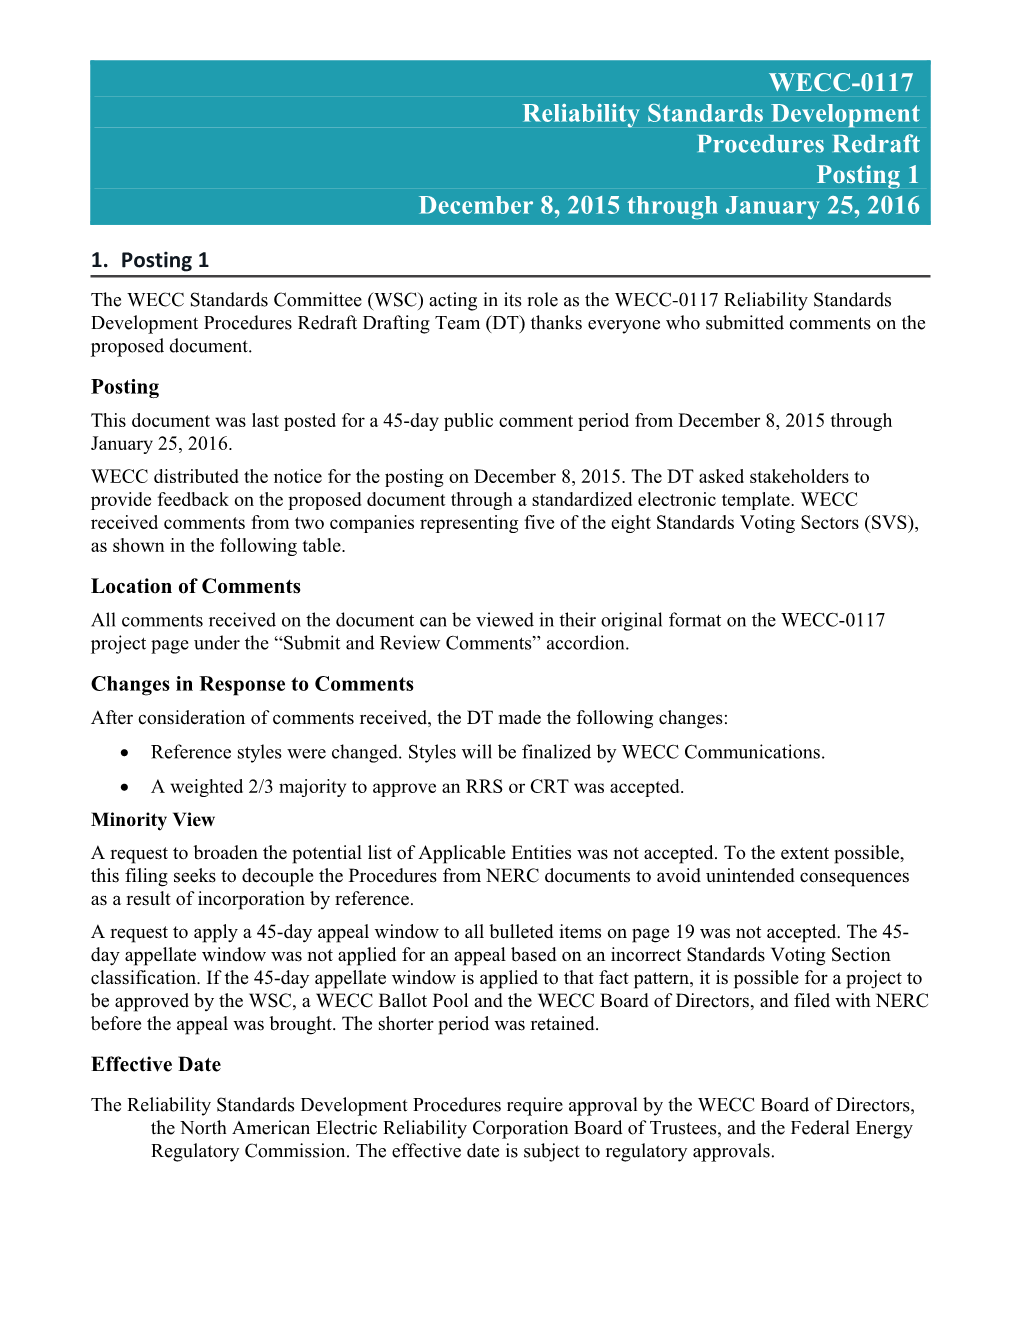 WECC-0117 Posting 1 Reliability Standards Development Procedures Response to Comments - Final